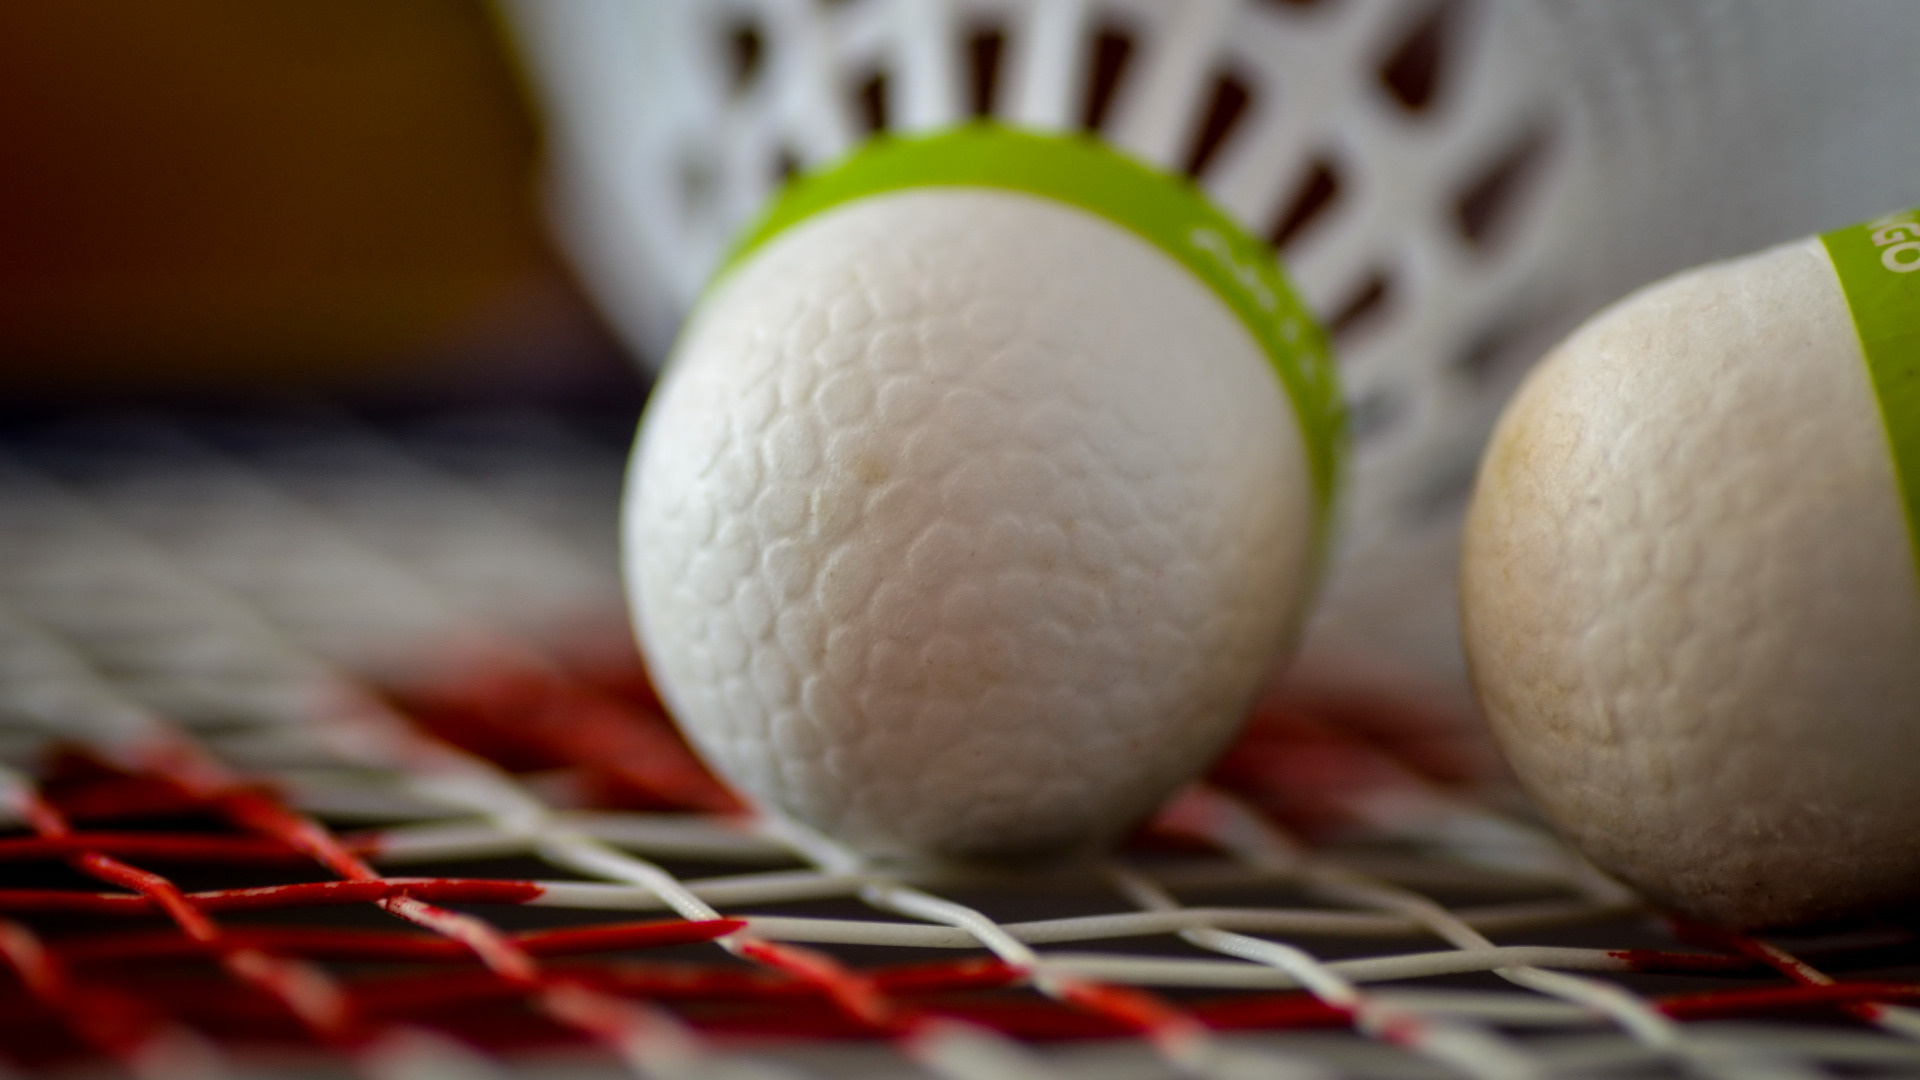 Macro badminton section, Sporting close-ups, Detailed photography, Close-up details, 1920x1080 Full HD Desktop